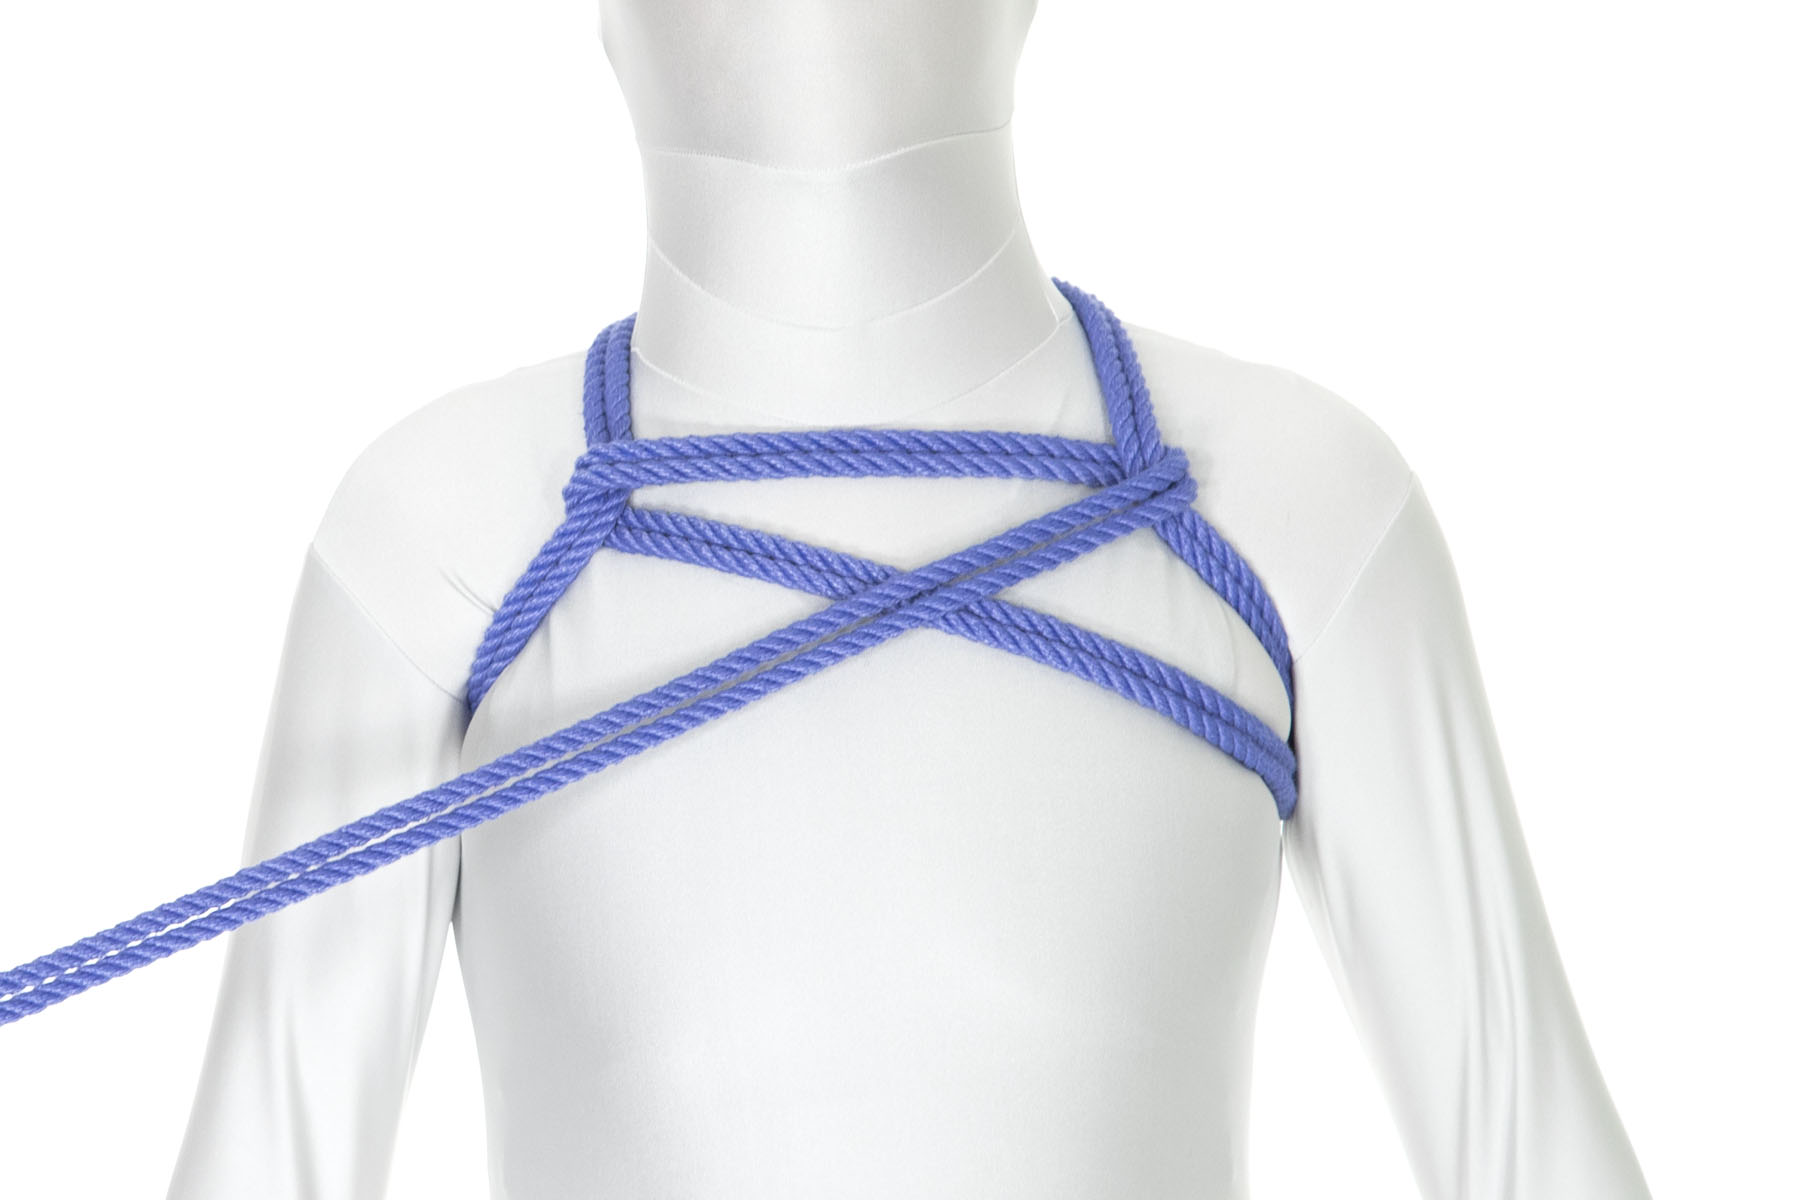 The rope goes under the left shoulder line and doubles back across it, travelling diagonally down and to the left. It crosses over the diagonal rope from step 1 and moves toward the right armpit.